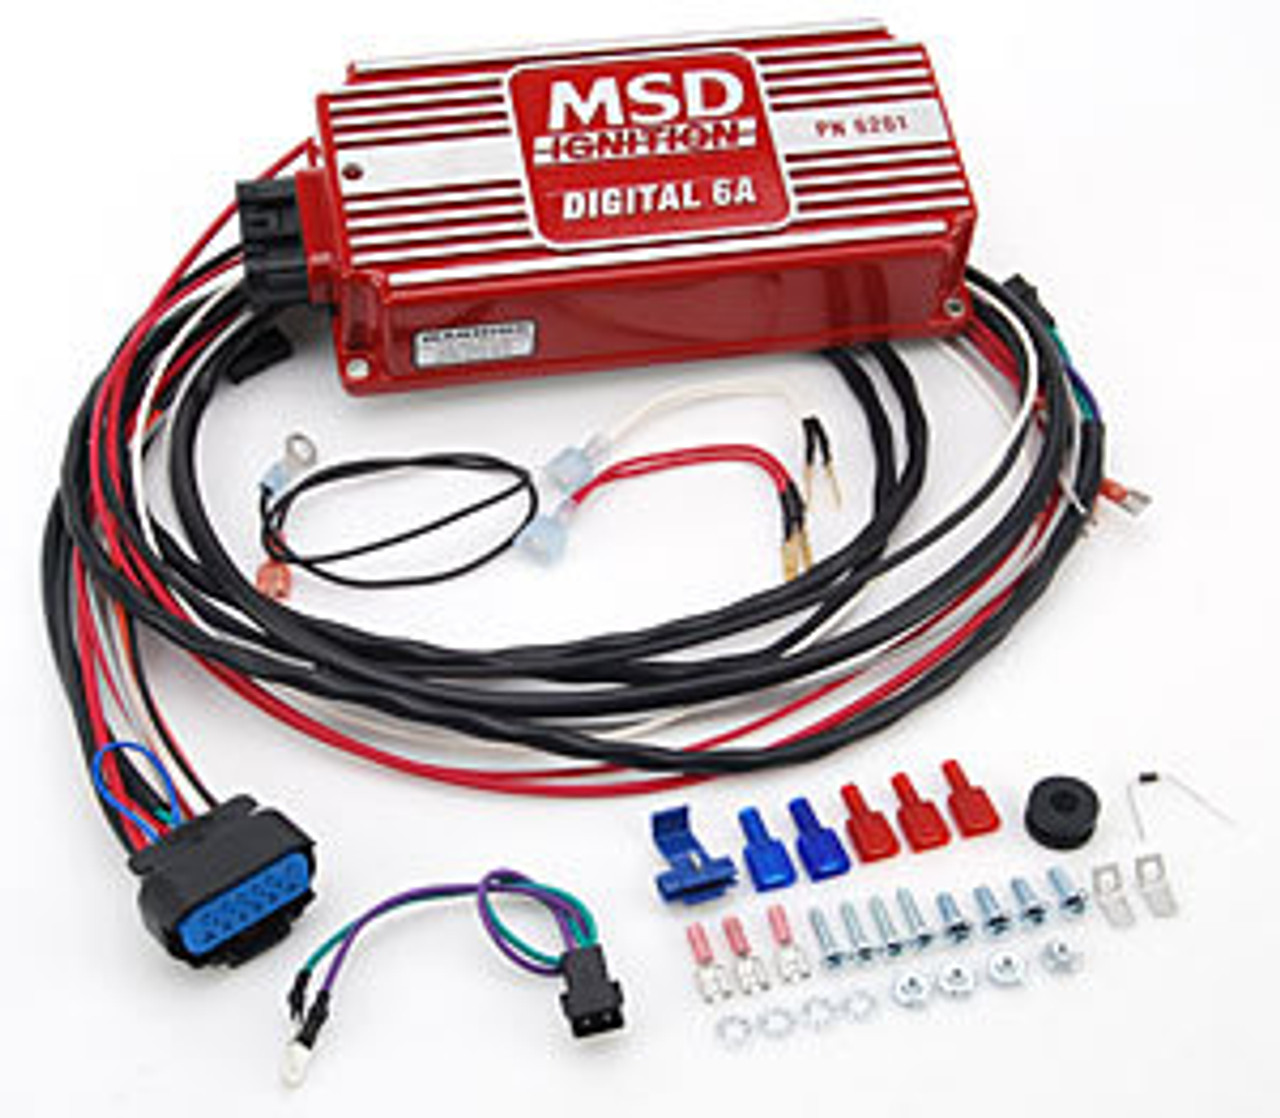 MSD Ignition Kit - Digital 6A/Distributor/Wires/Coil/Harness 86-93 Ford Mustang